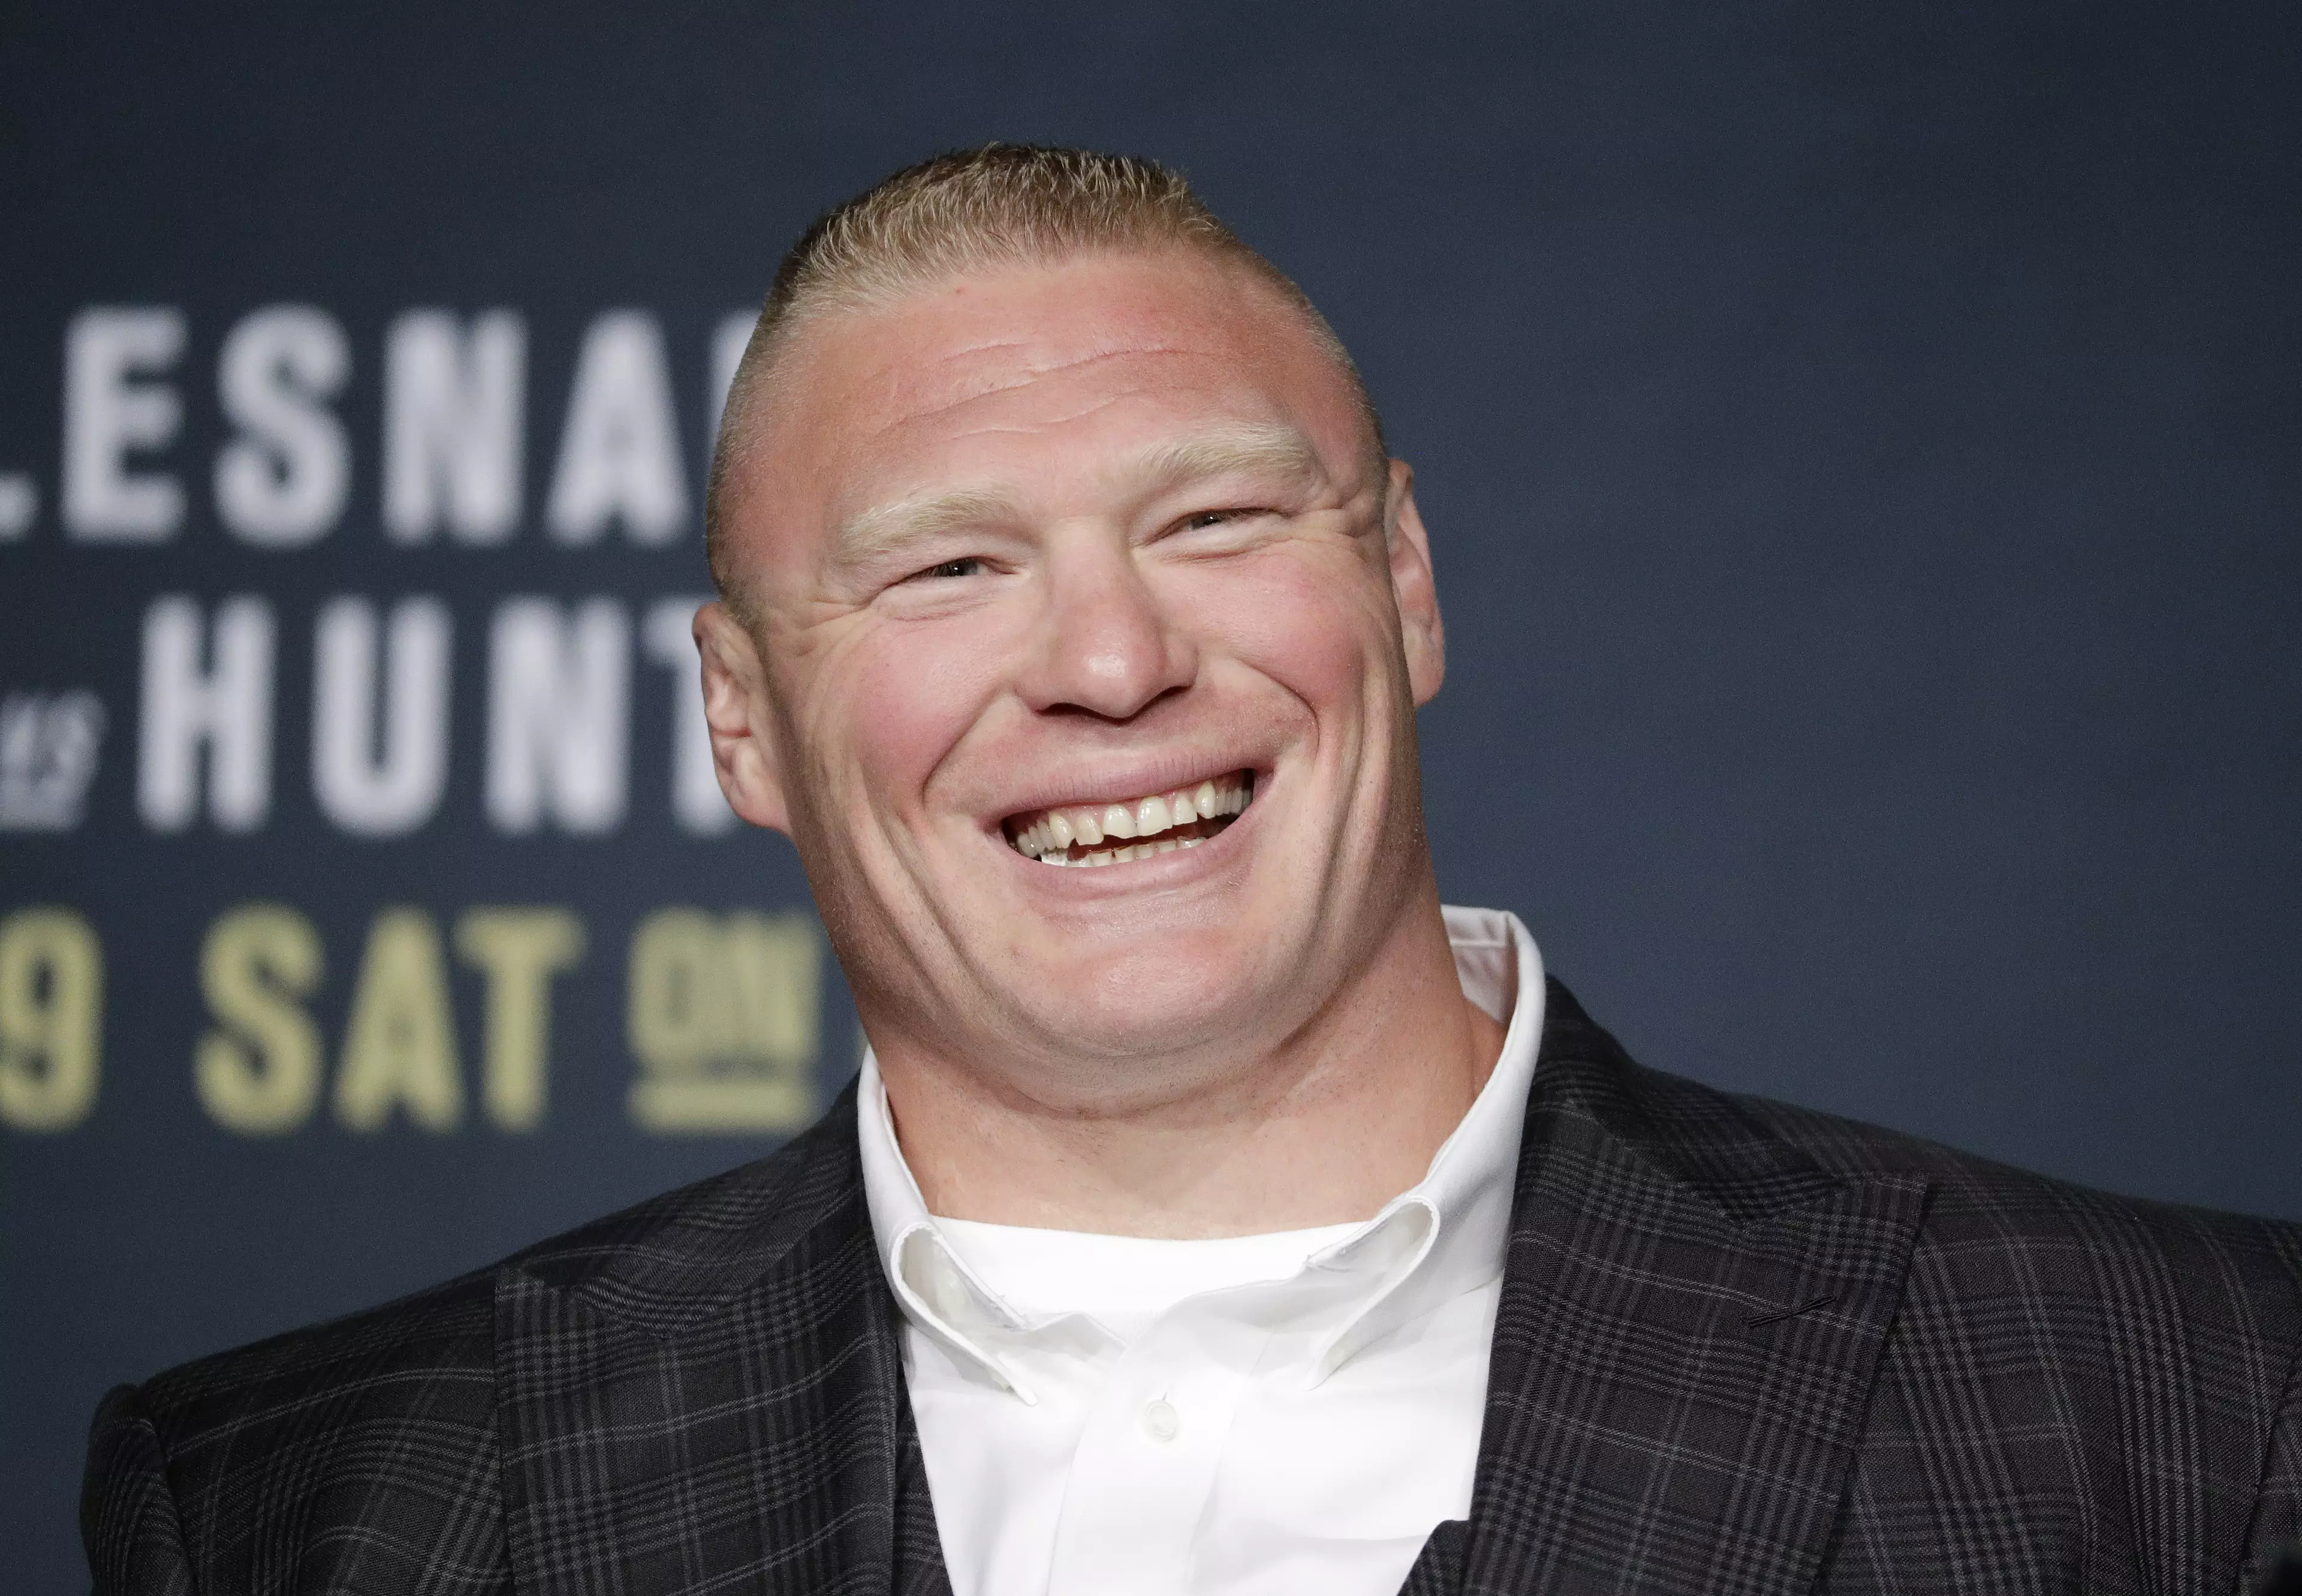 Jim Ross Believes Brock Lesnar Will Fight In The UFC Again